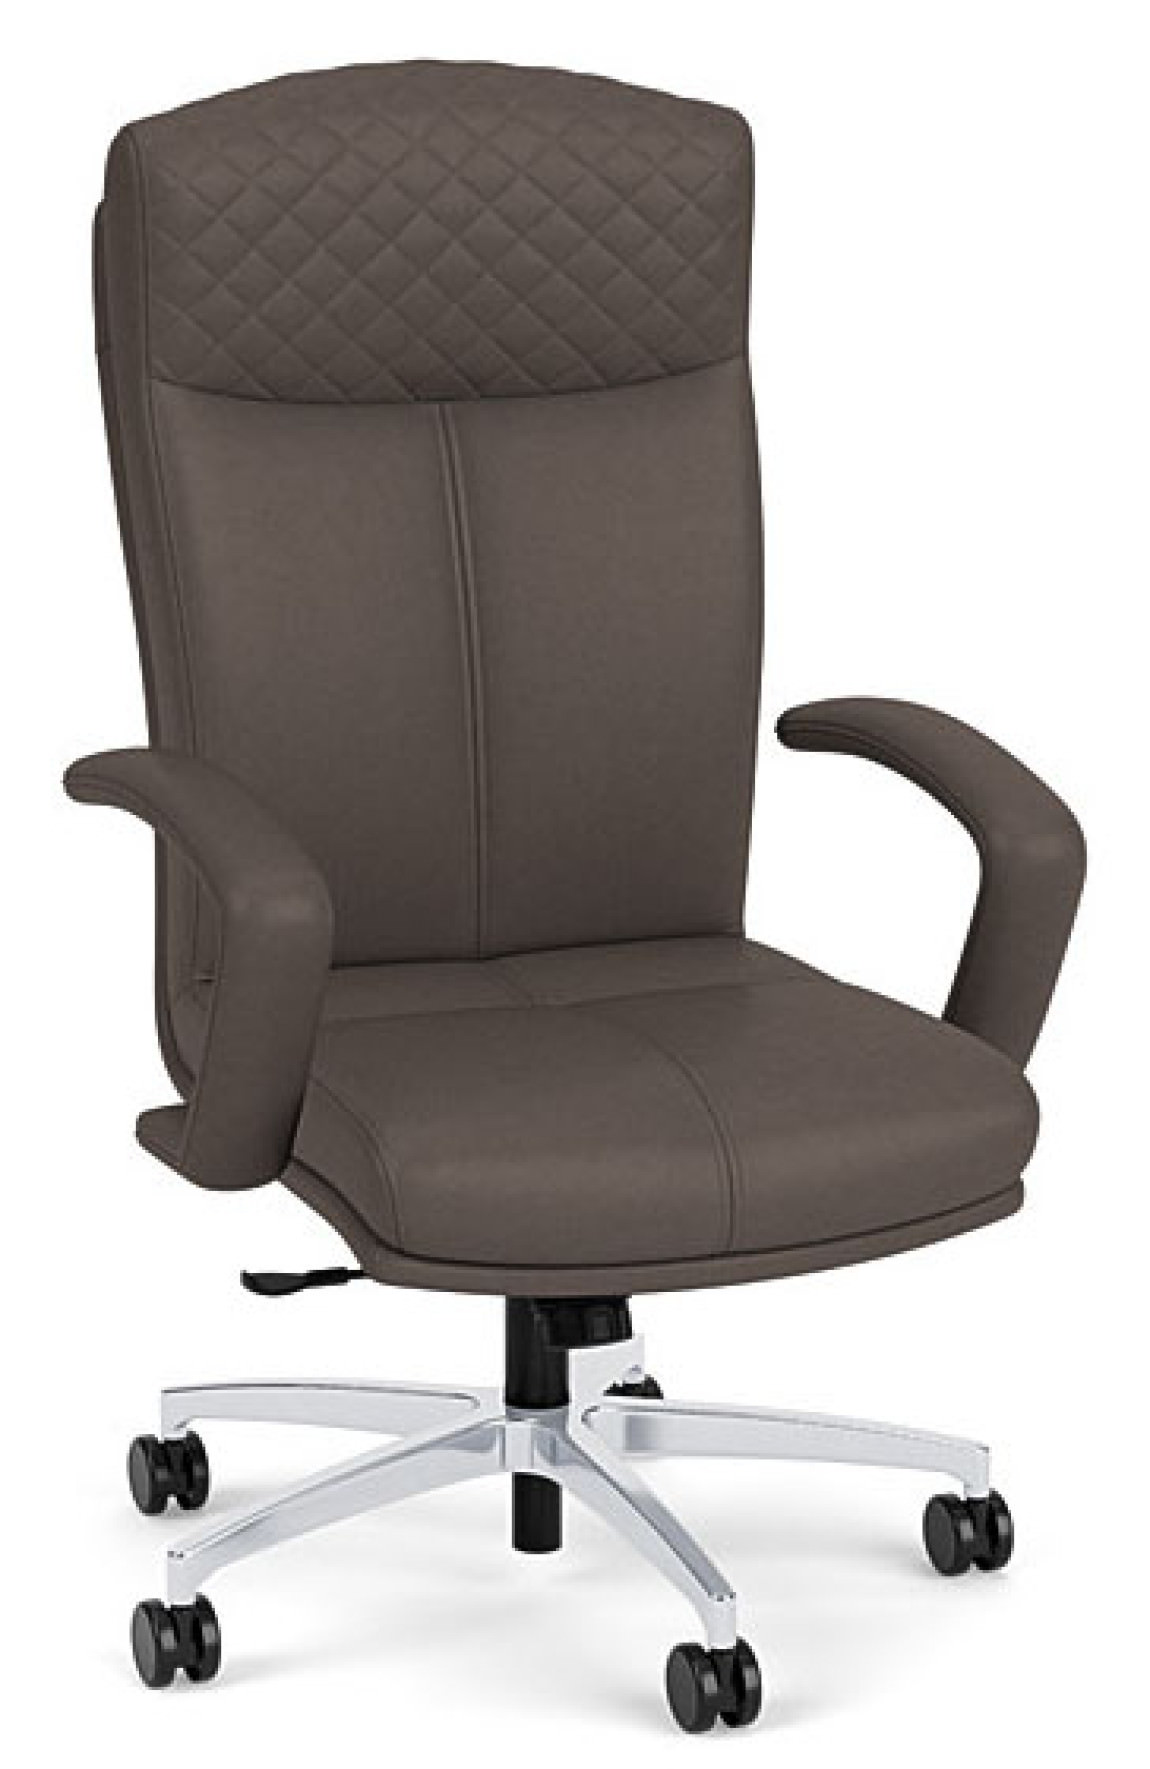 Vinyl Executive Conference Room Chair